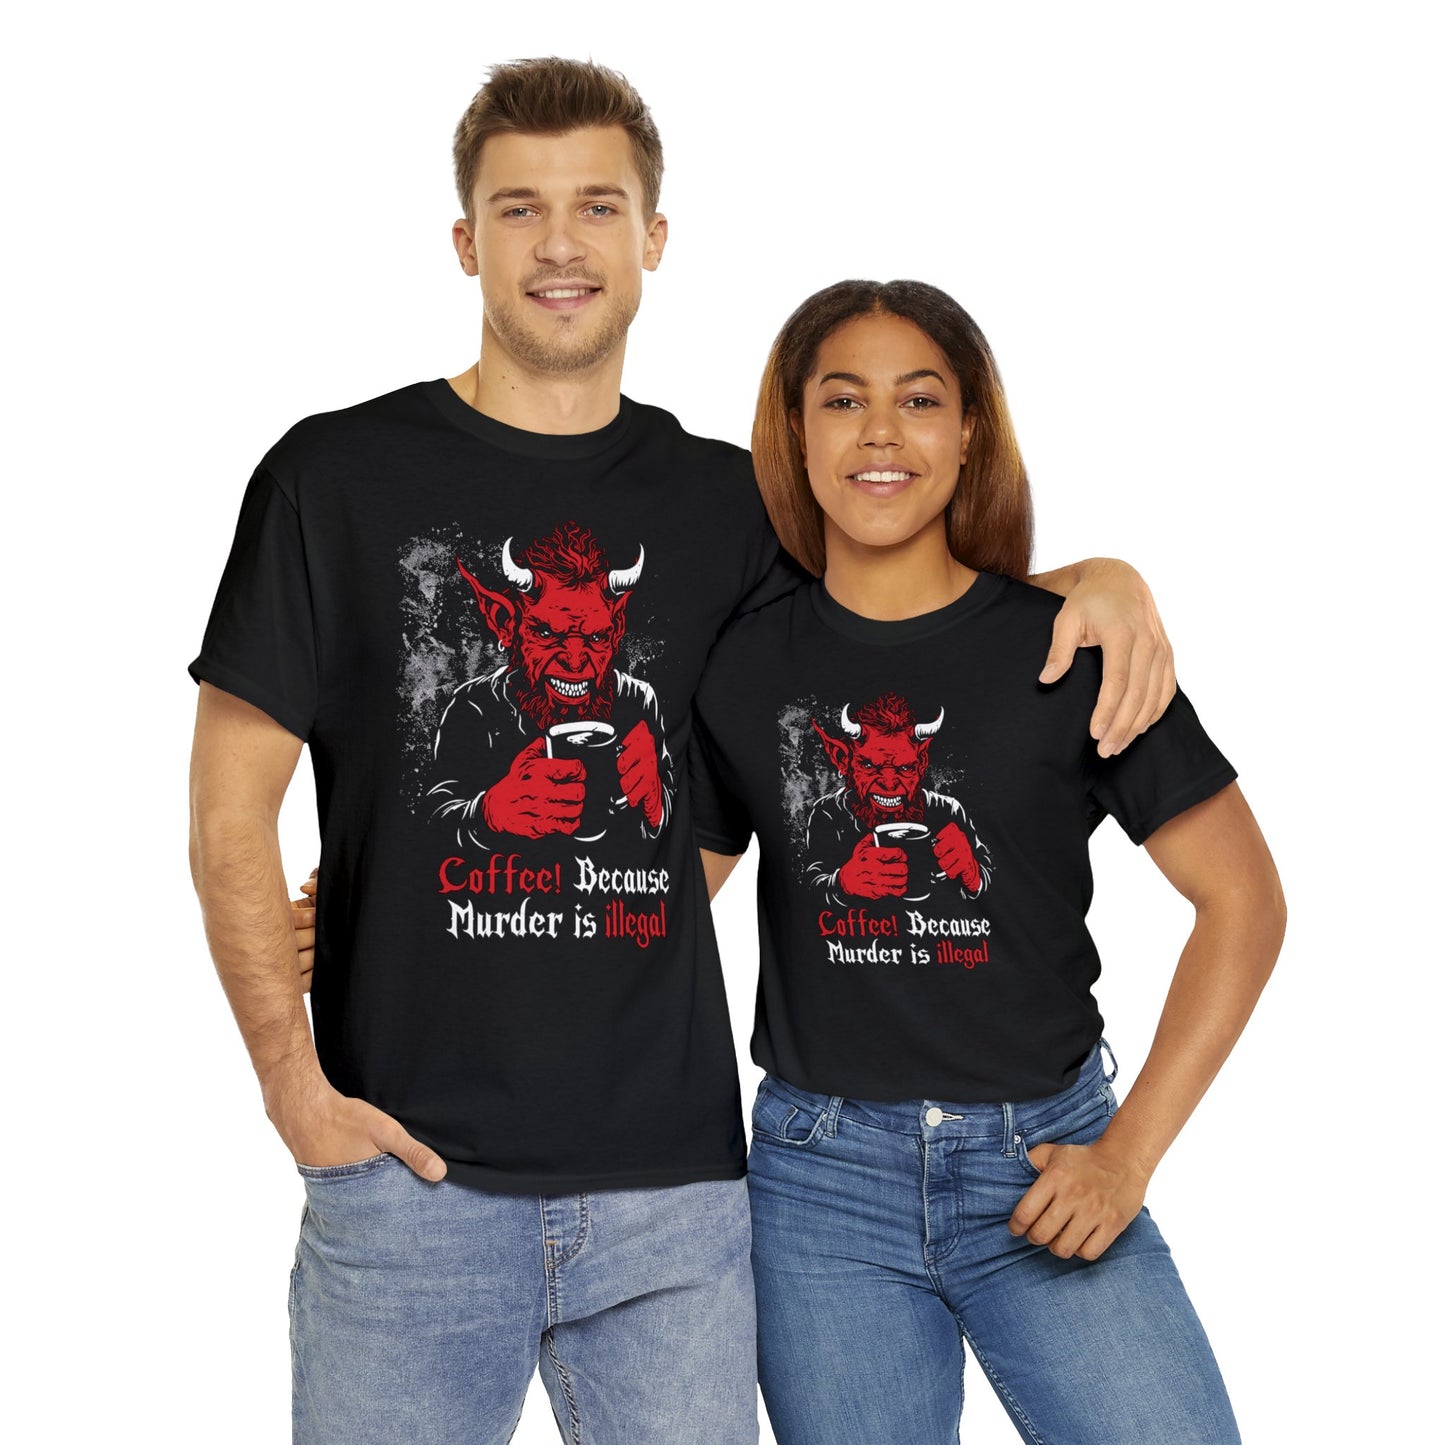 Unisex T-shirt Coffee Devil in Red